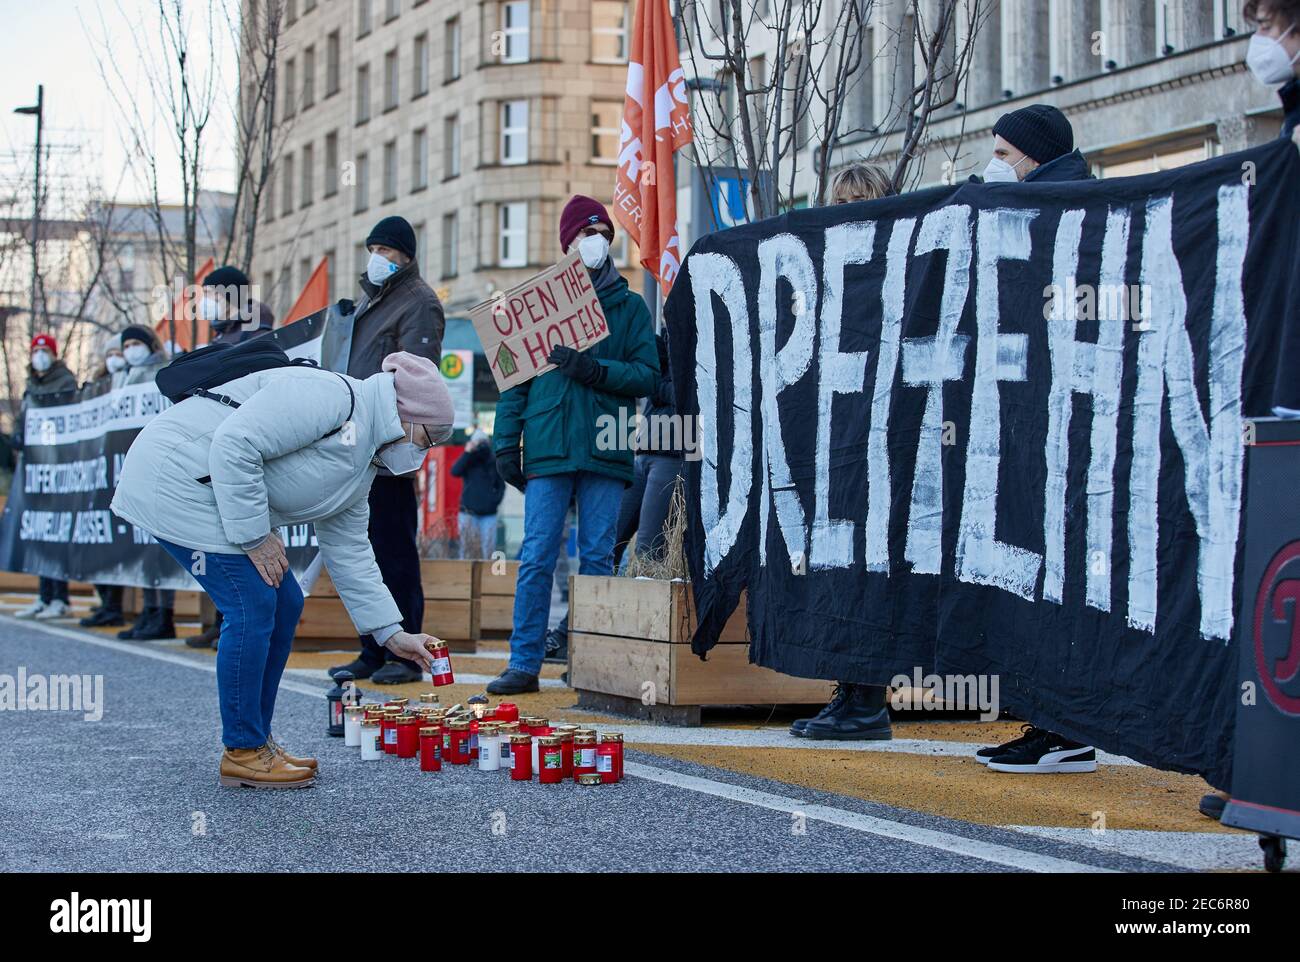 Hamburg, Germany. 13th Feb, 2021. A woman places a devotional candle during a demonstration on Jungfernstieg. Over 200 people demonstrated in favour of housing the homeless in hotels. Credit: Georg Wendt/dpa/Alamy Live News Stock Photo